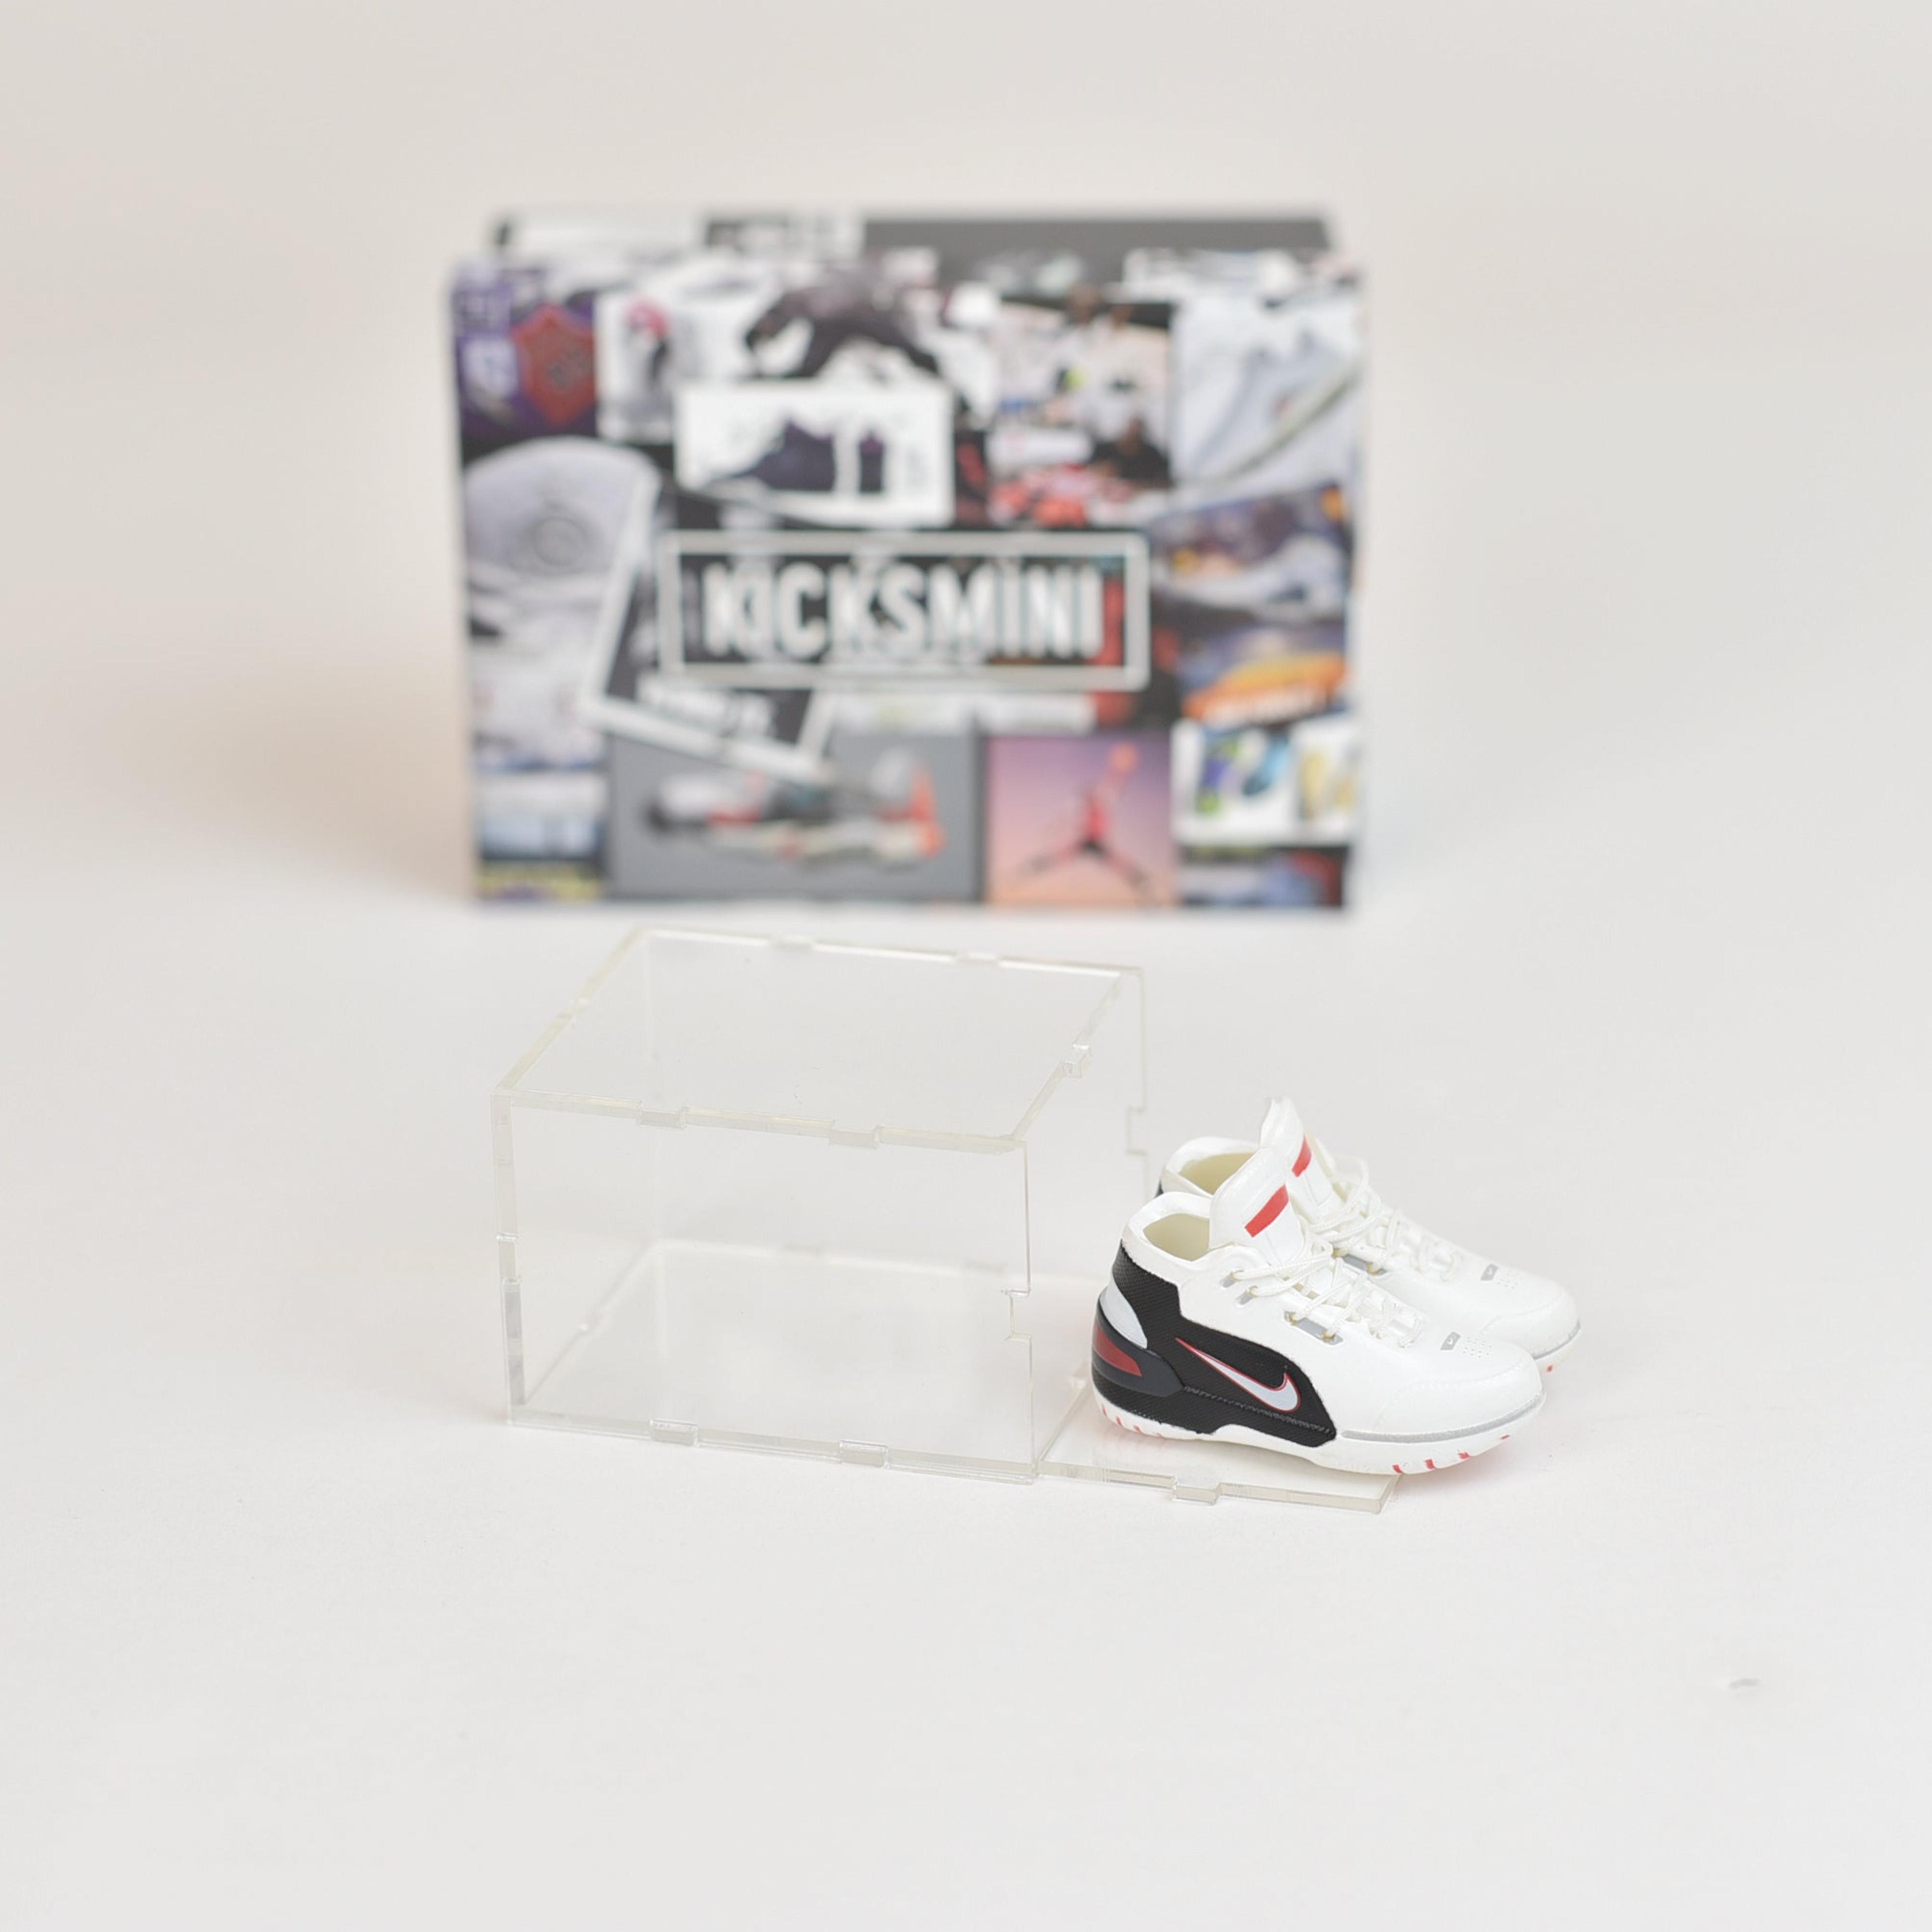 Alternate View 14 of Kobe Bryant/LeBron James/Steph Curry Mini Sneaker Collection wit